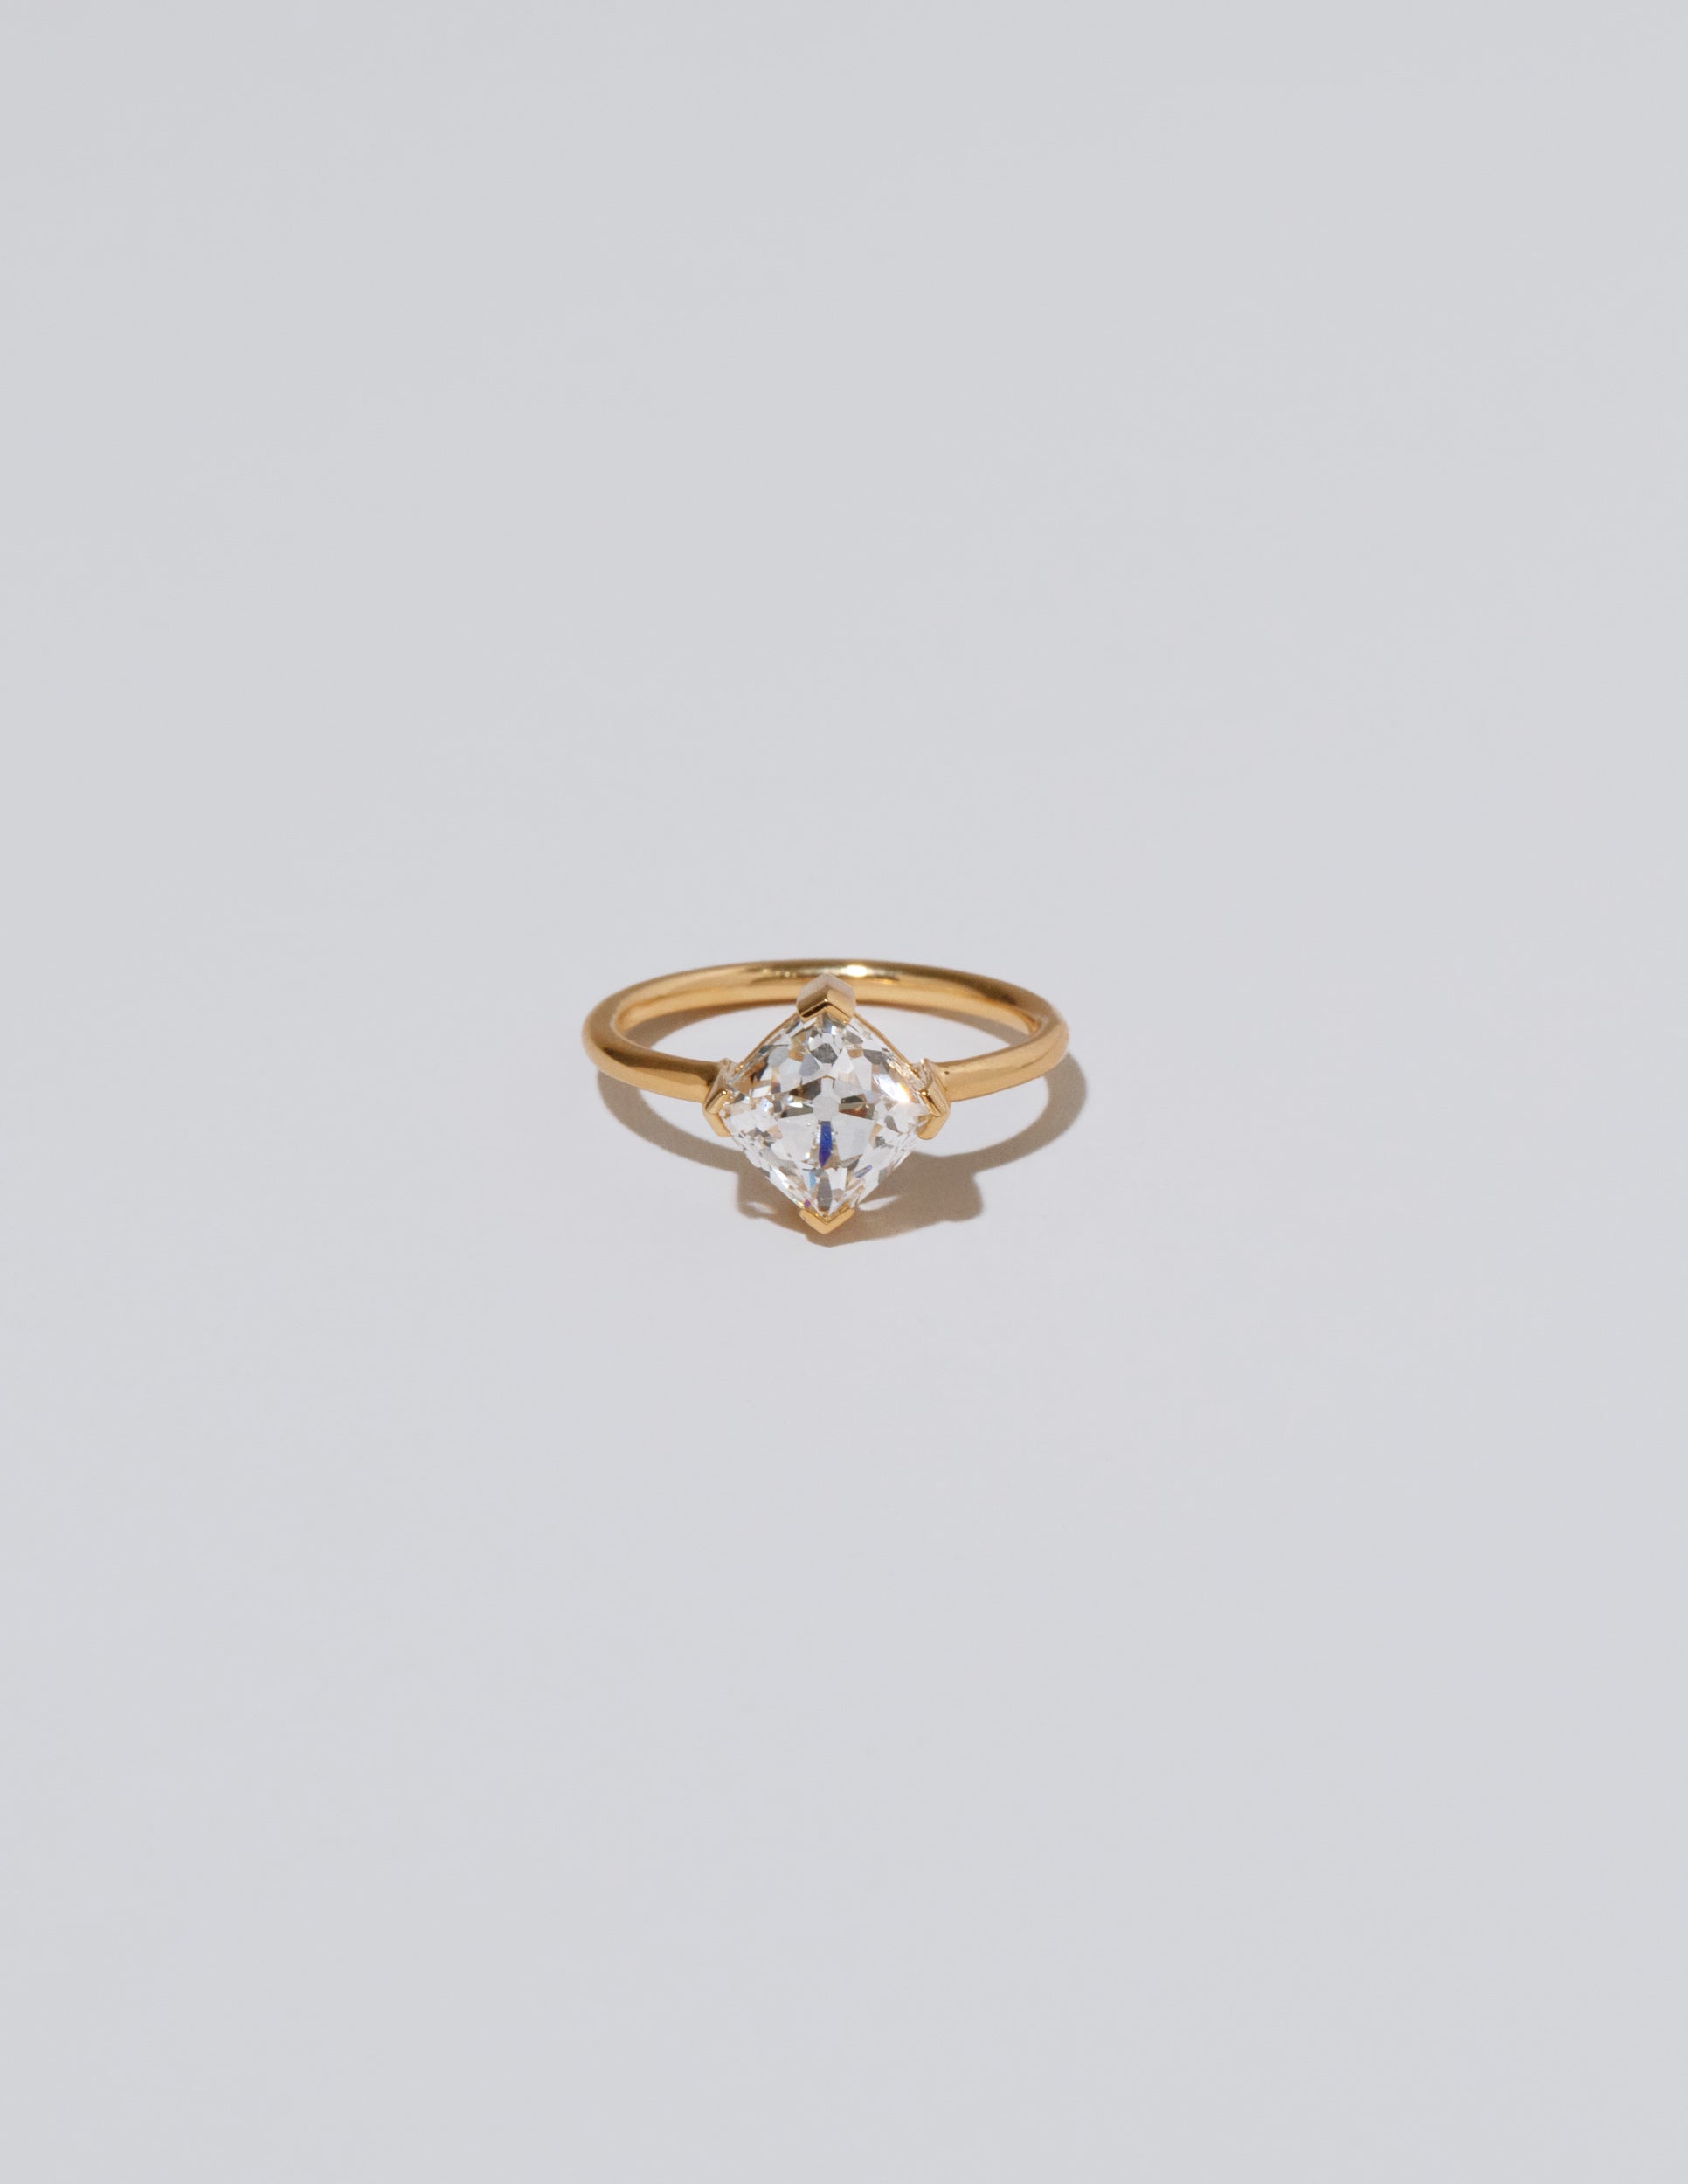 Product photo of the Sauté Ring on light color background